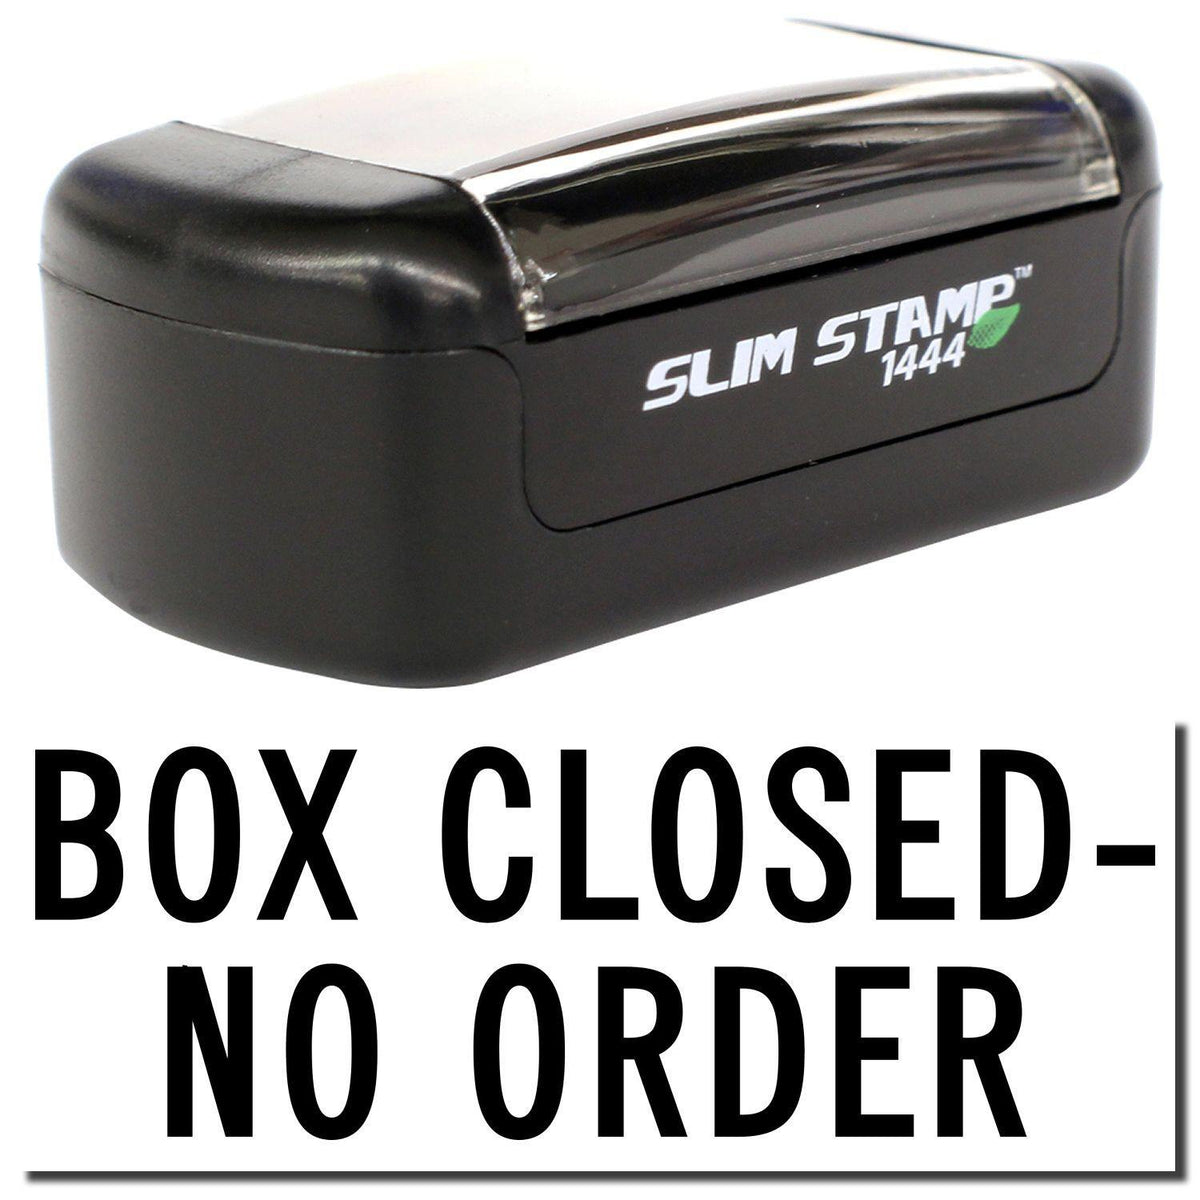 A stock office pre-inked stamp with a stamped image showing how the text &quot;BOX CLOSED - NO ORDER&quot; is displayed after stamping.